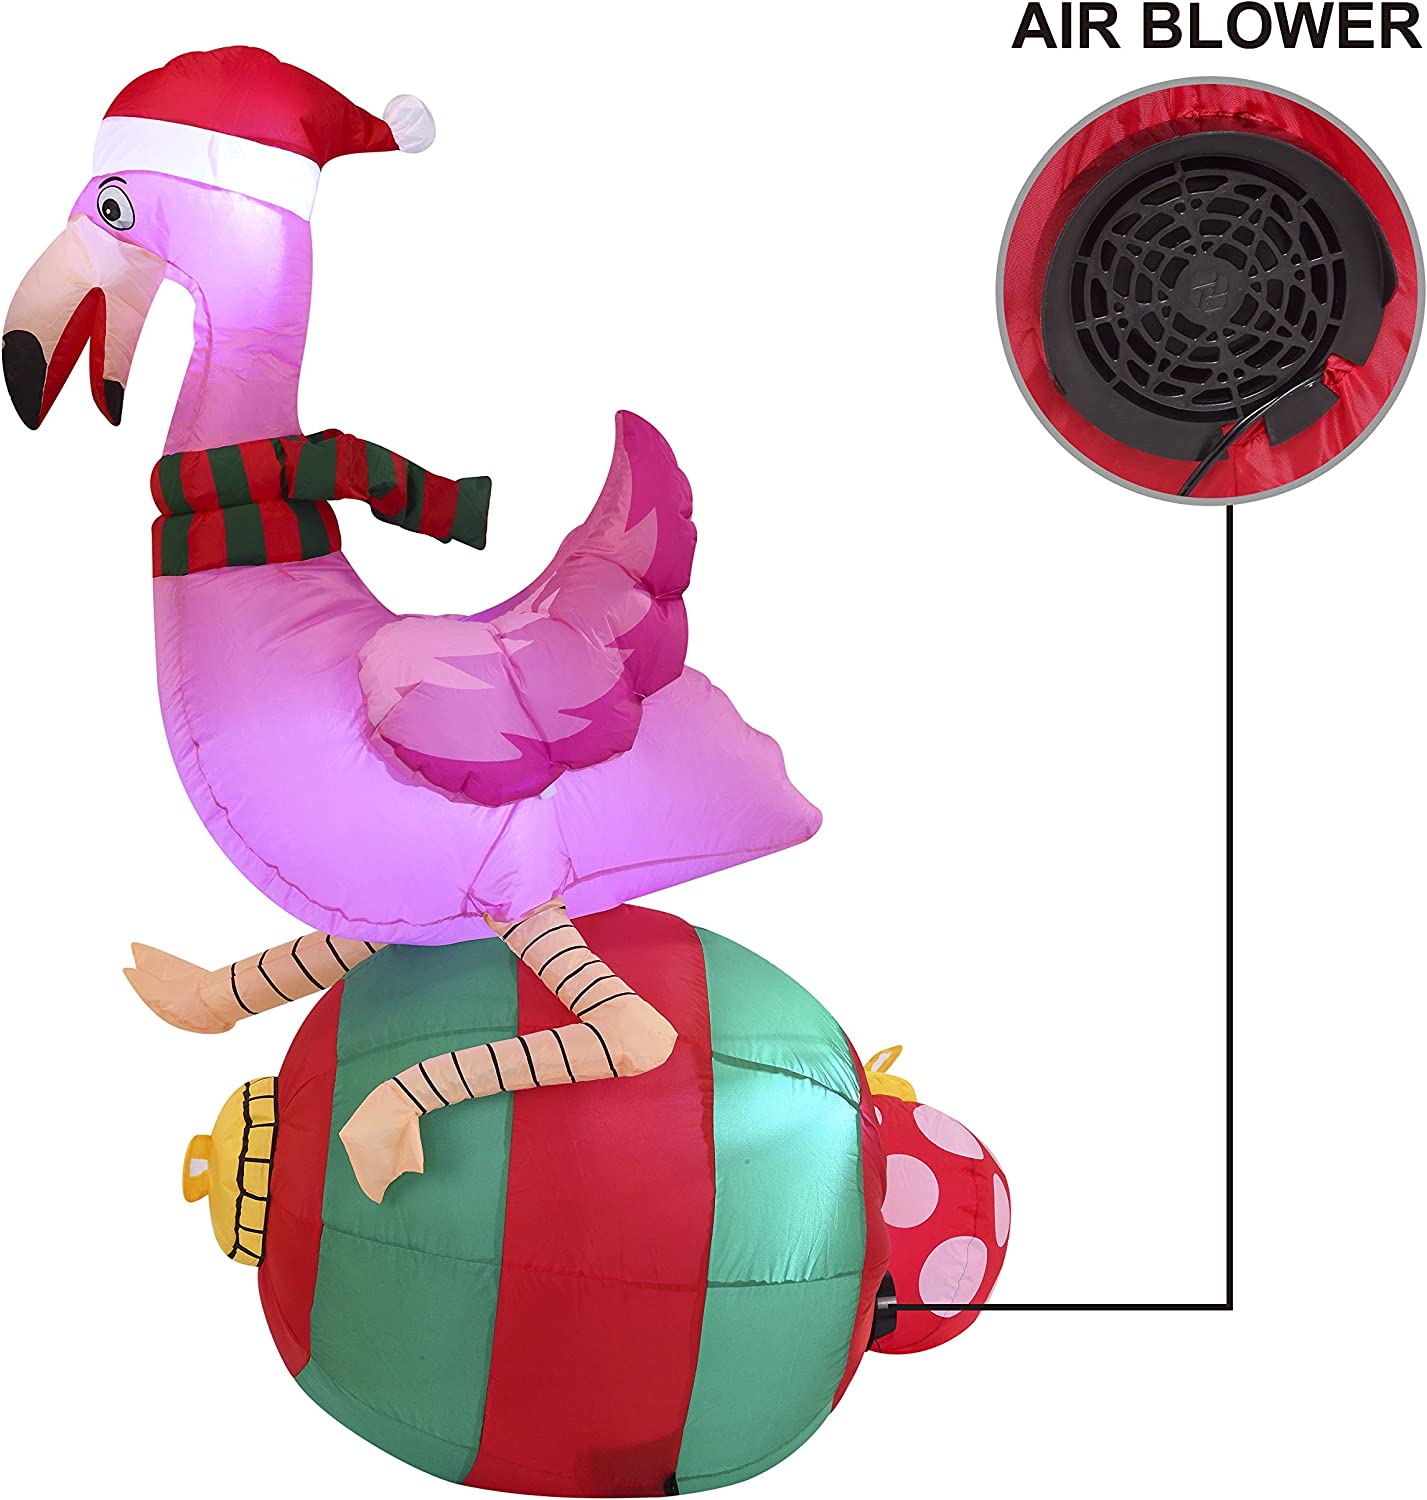 Christmas Large Flamingo on Ornament Inflatable (6 ft)